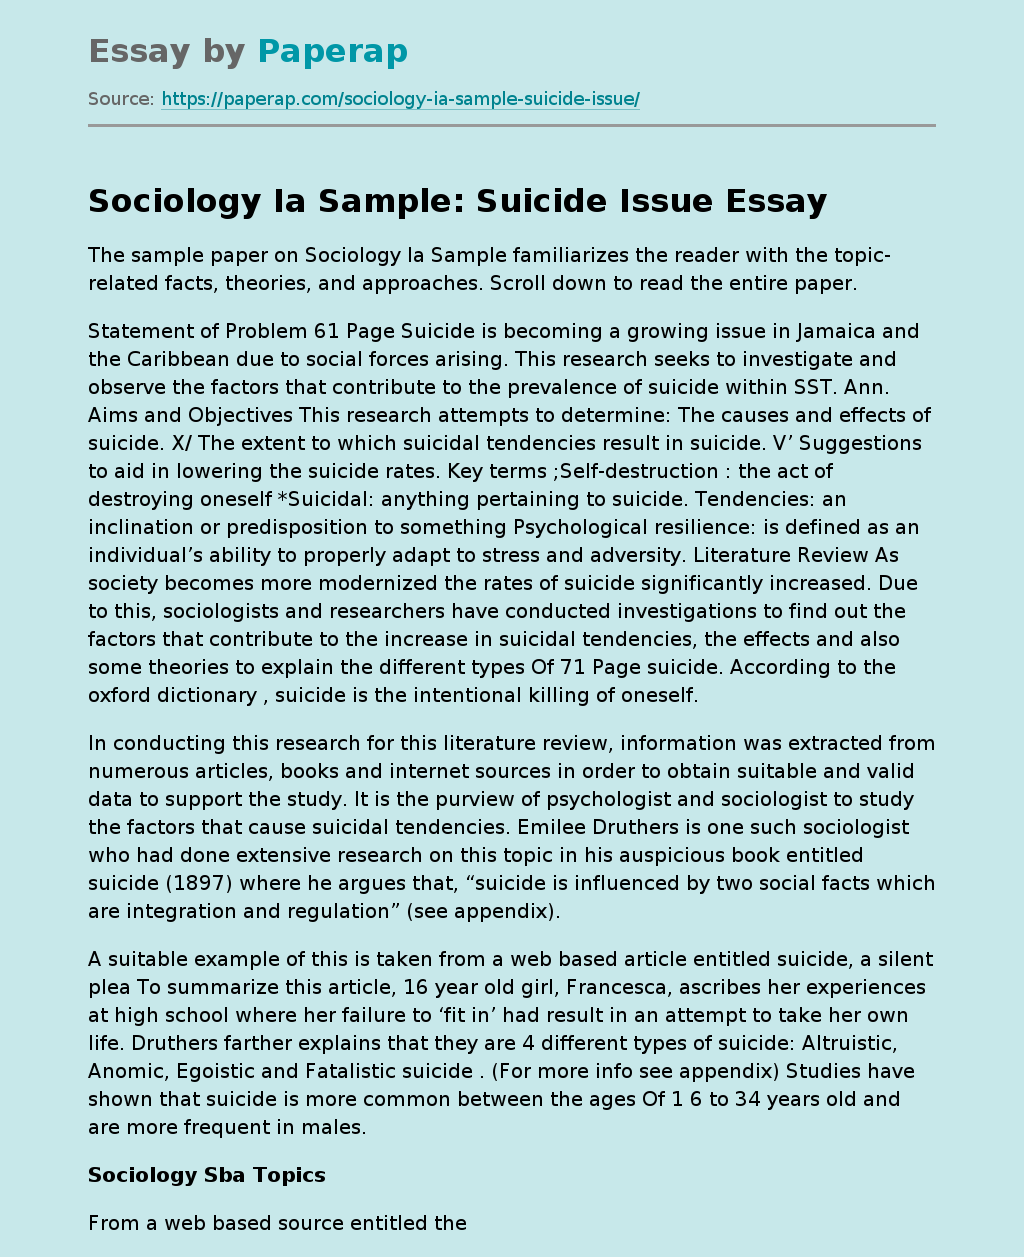 Sociology Ia Sample: Suicide Issue